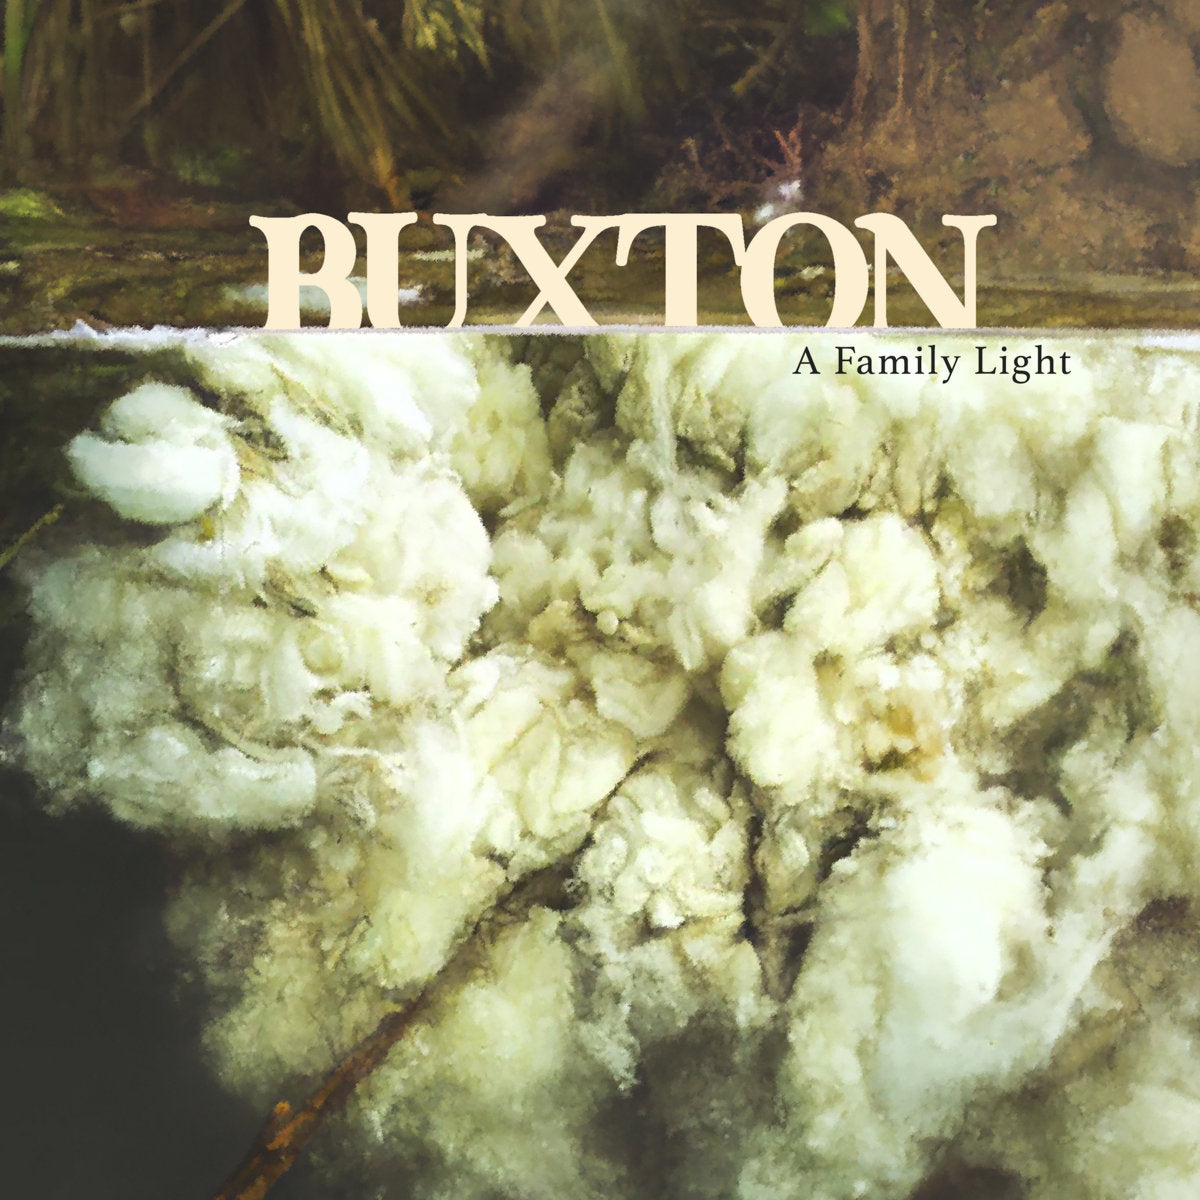 Buxton "A Family Light" [Signed, Texas Indie Exclusive Clear Green] 2LP